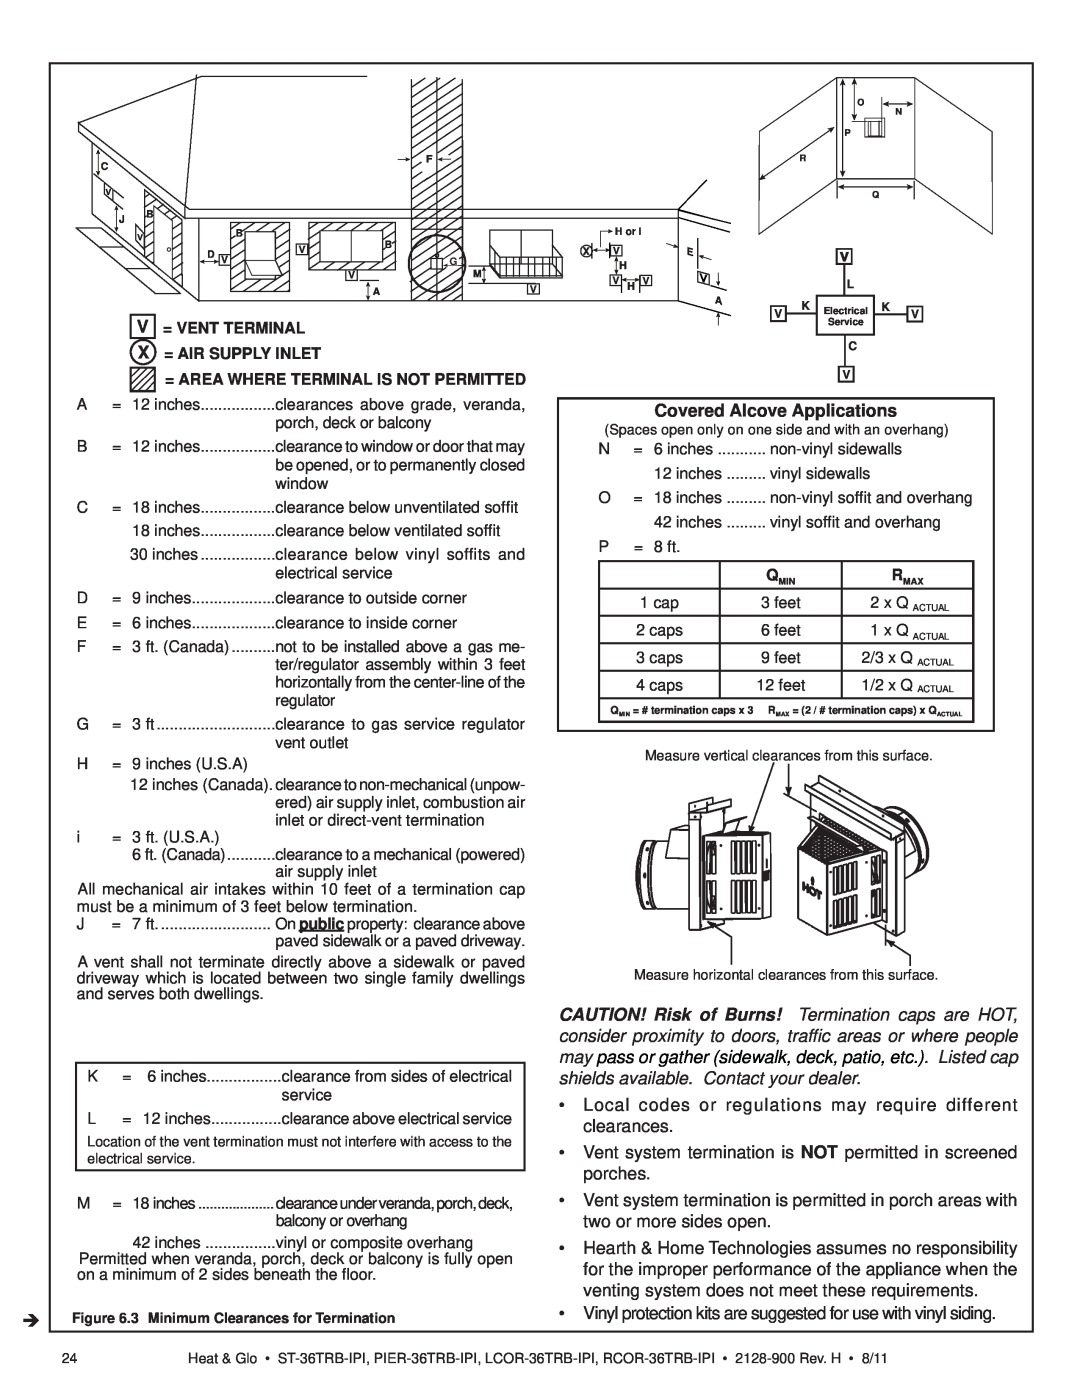 Heat & Glo LifeStyle ST-36TRB-IPI owner manual Covered Alcove Applications 